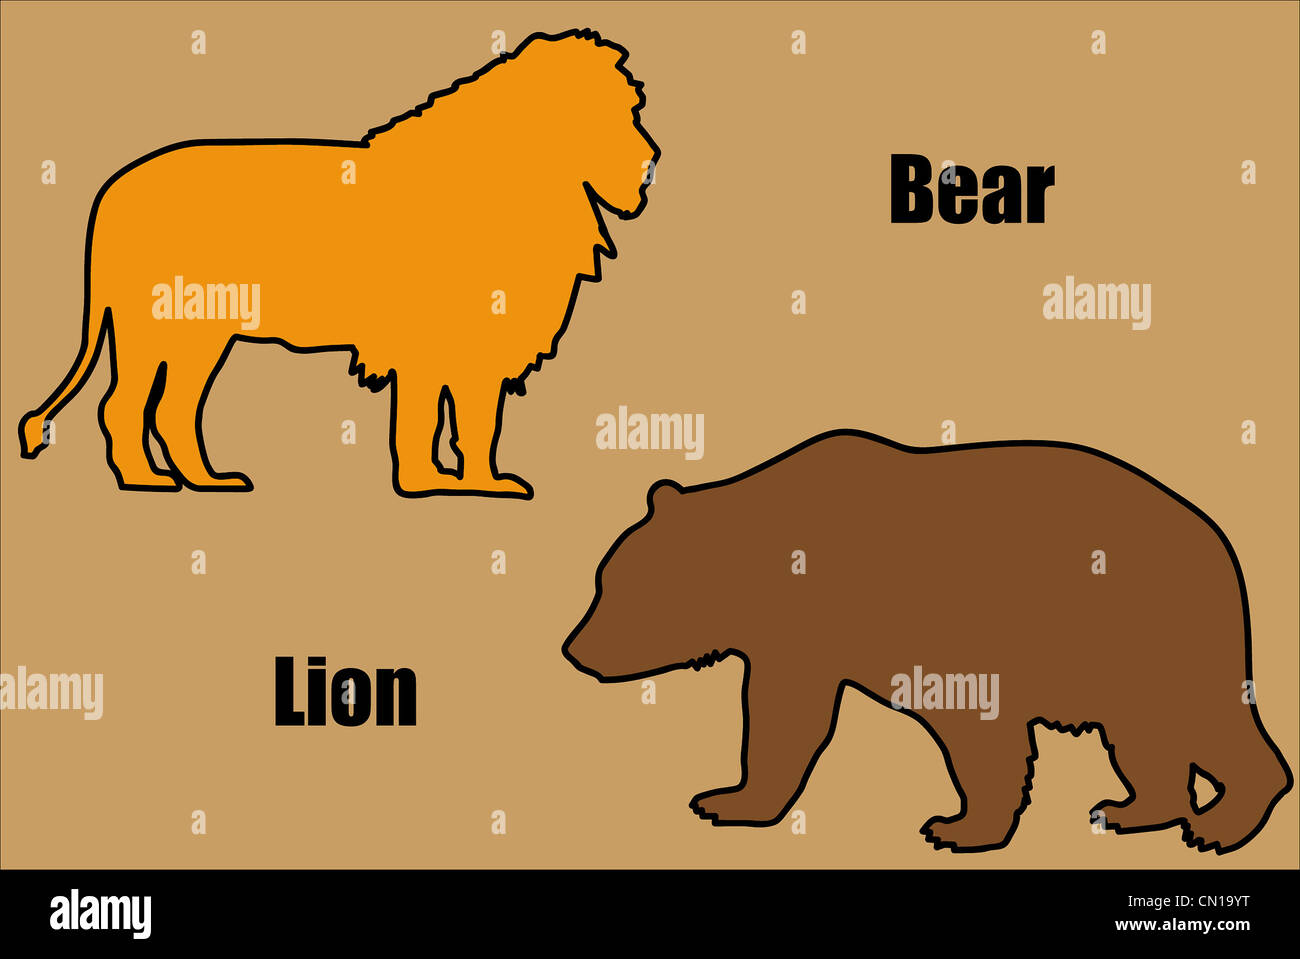 Illustration of bear and lion. Stock Photo